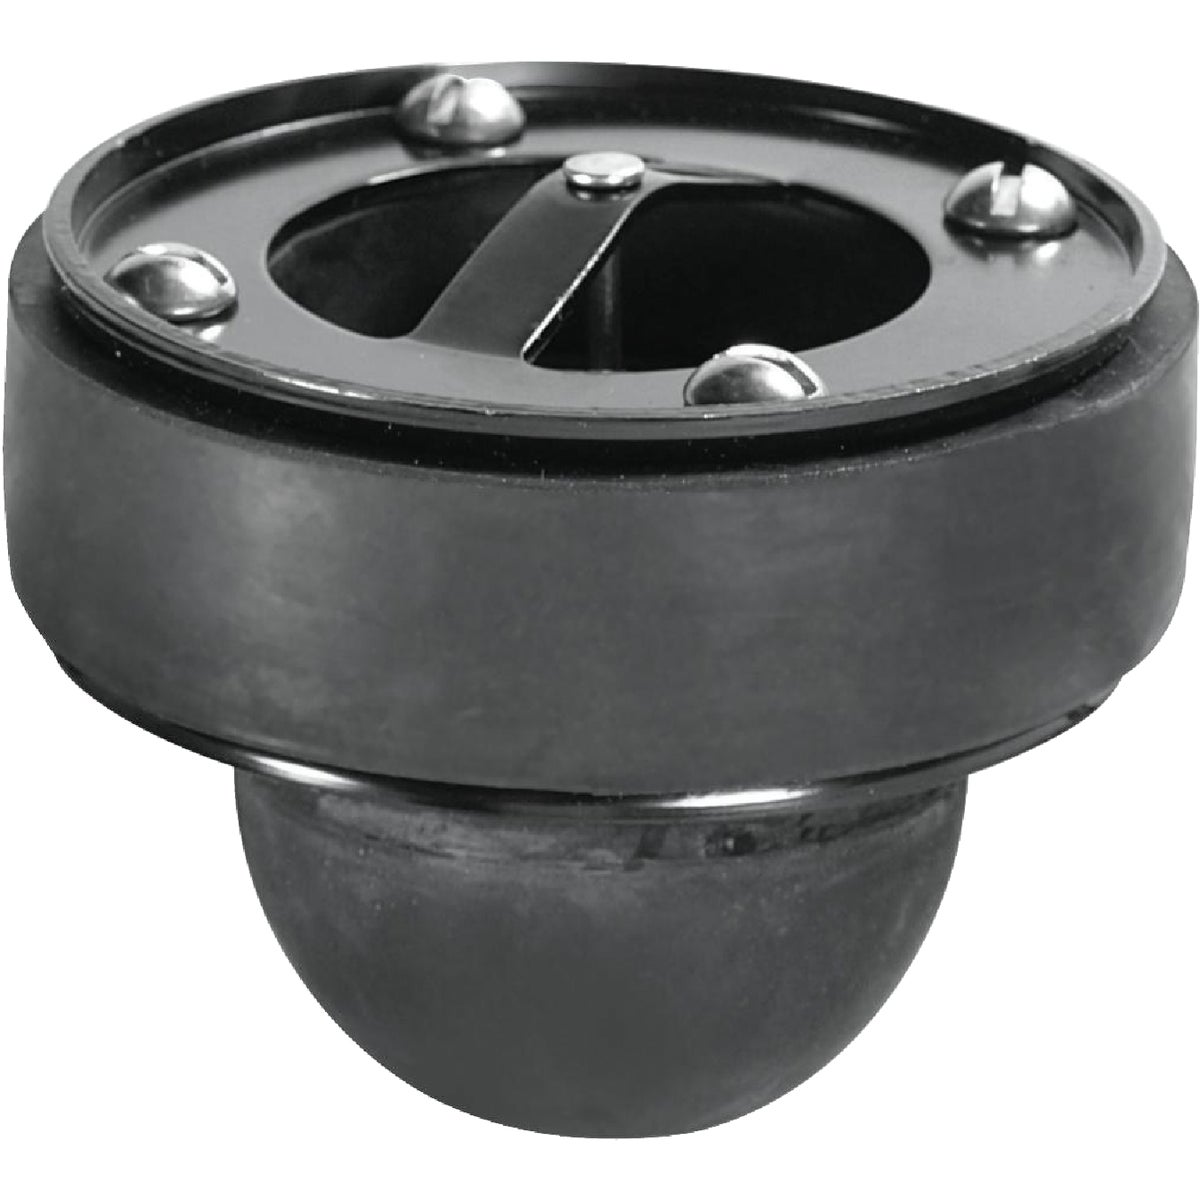 Item 441631, Flood-Guard operates like a check valve to seal off water back-up caused by